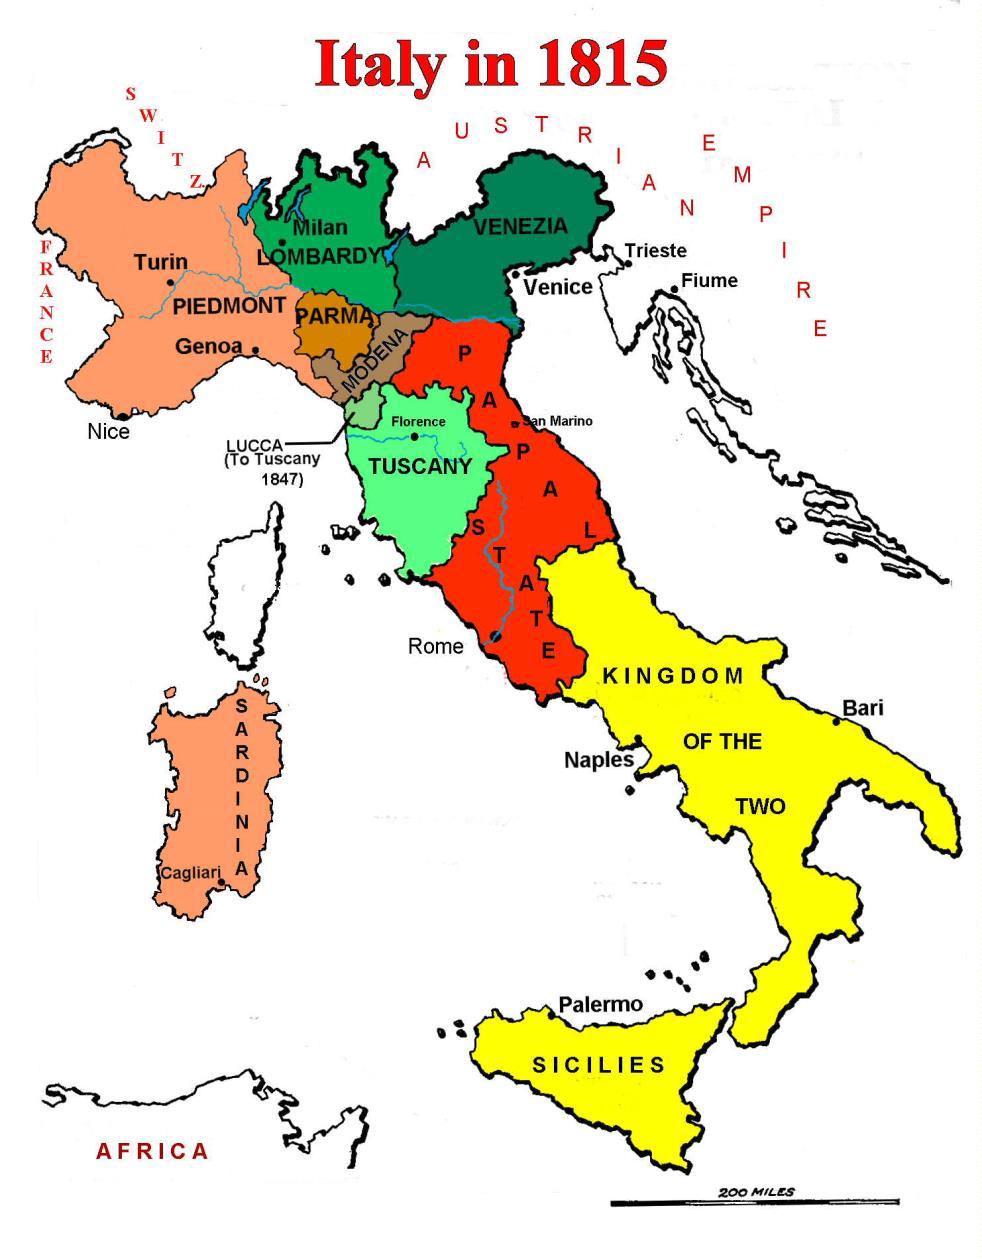 ITALY After the Congress of Vienna (1815), the land of Italy was still divided: - Austria ruled the Italian provinces of Venetia and